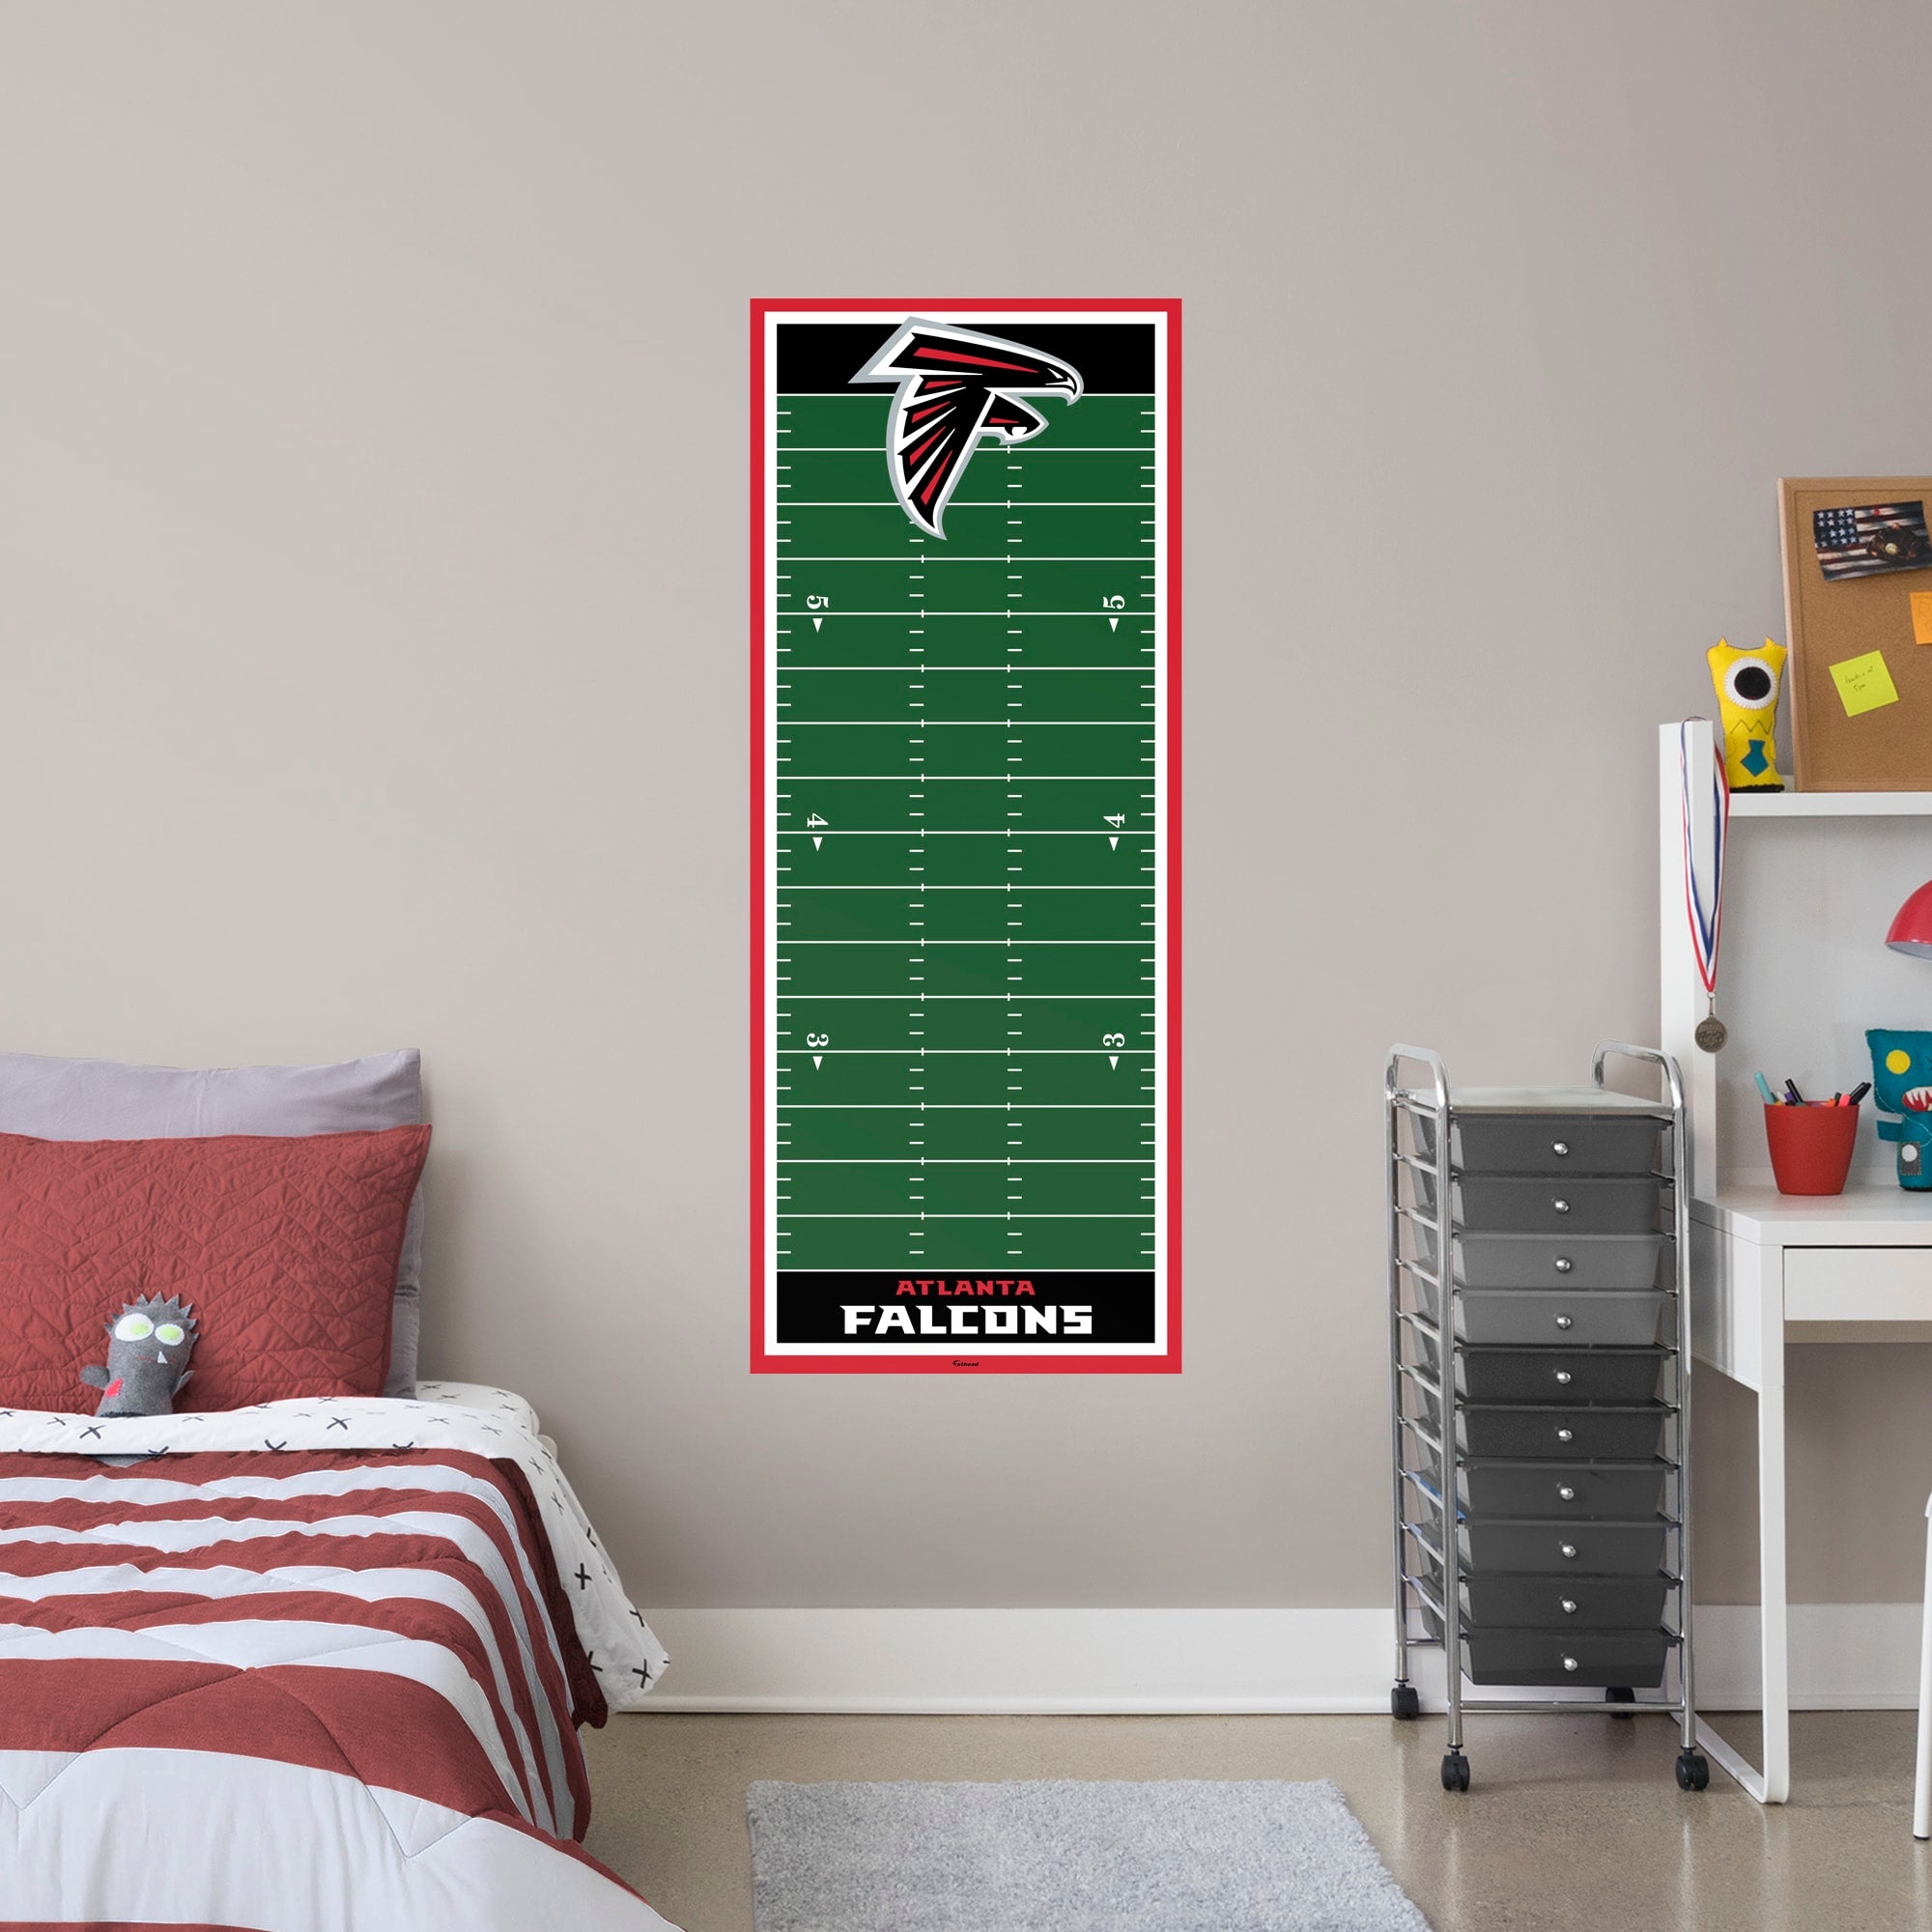 Atlanta Falcons: Growth Chart - Officially Licensed NFL Removable Wall Graphic by Fathead | Vinyl